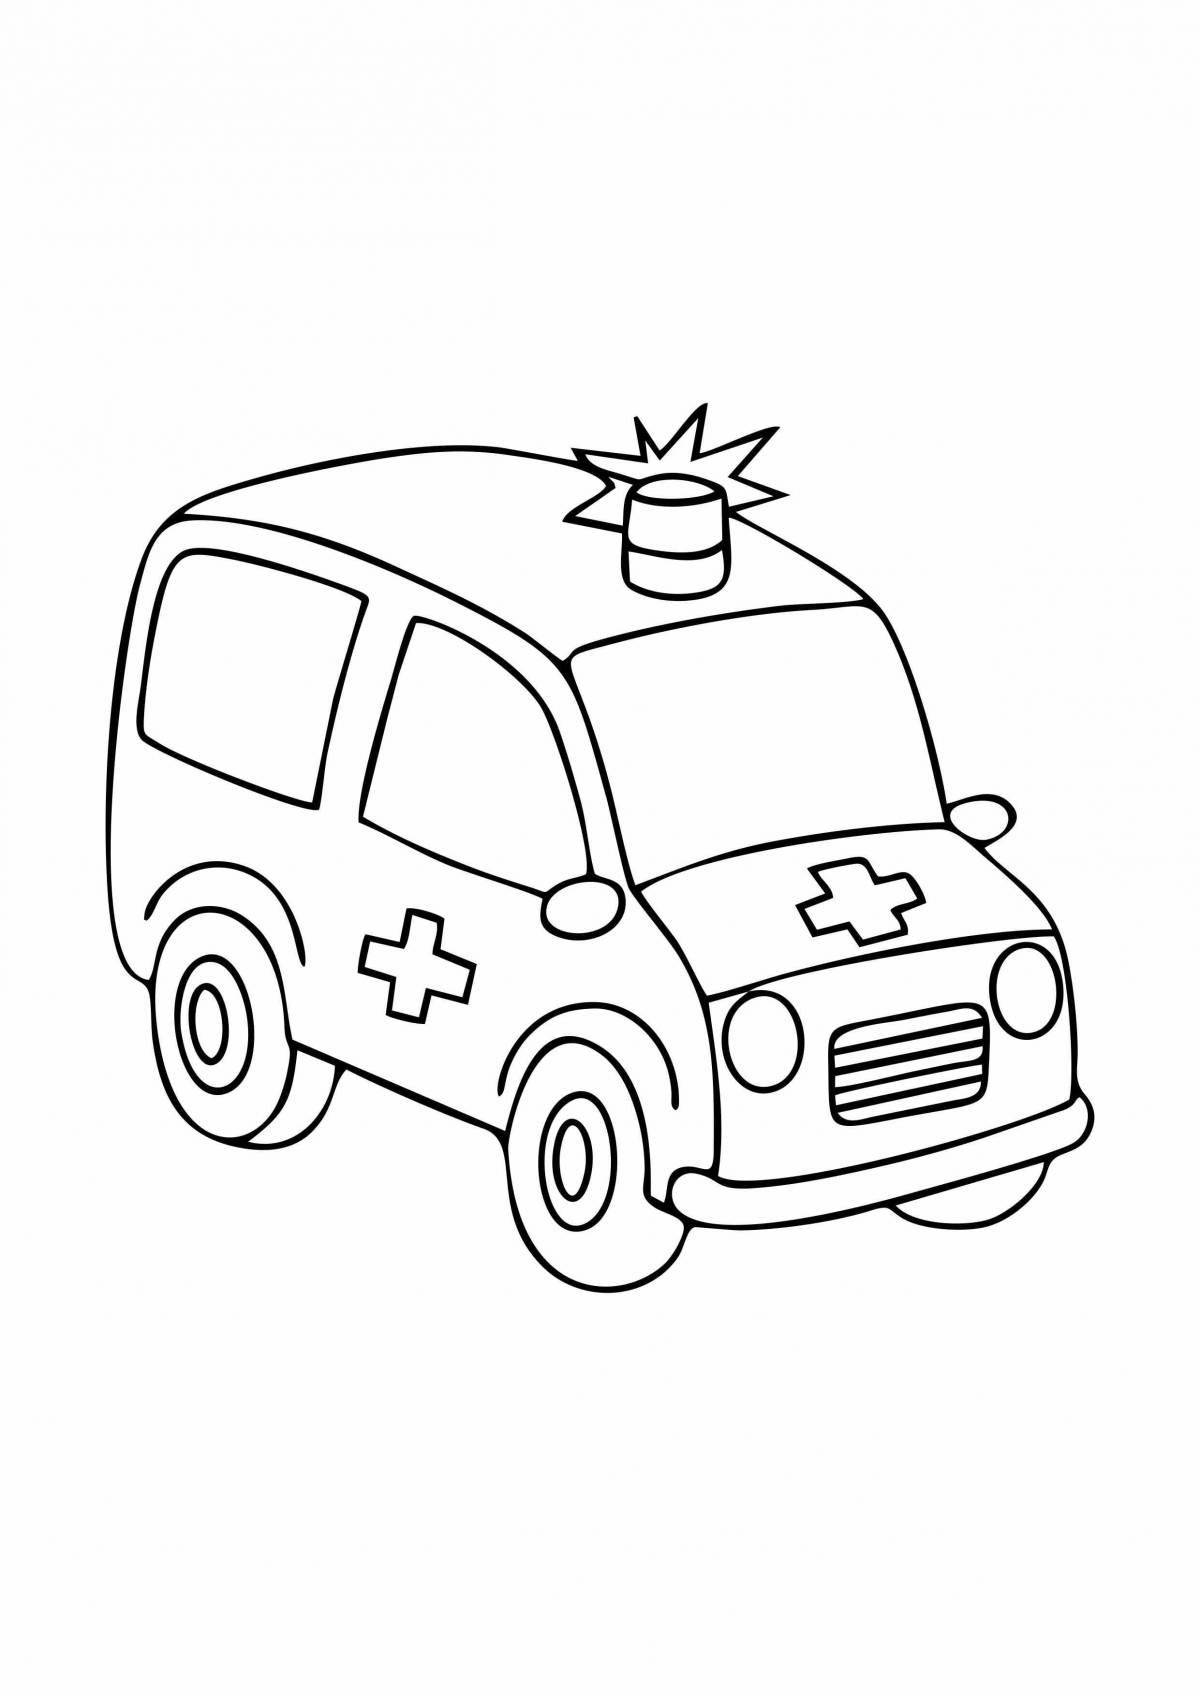 Special vehicle activation coloring page